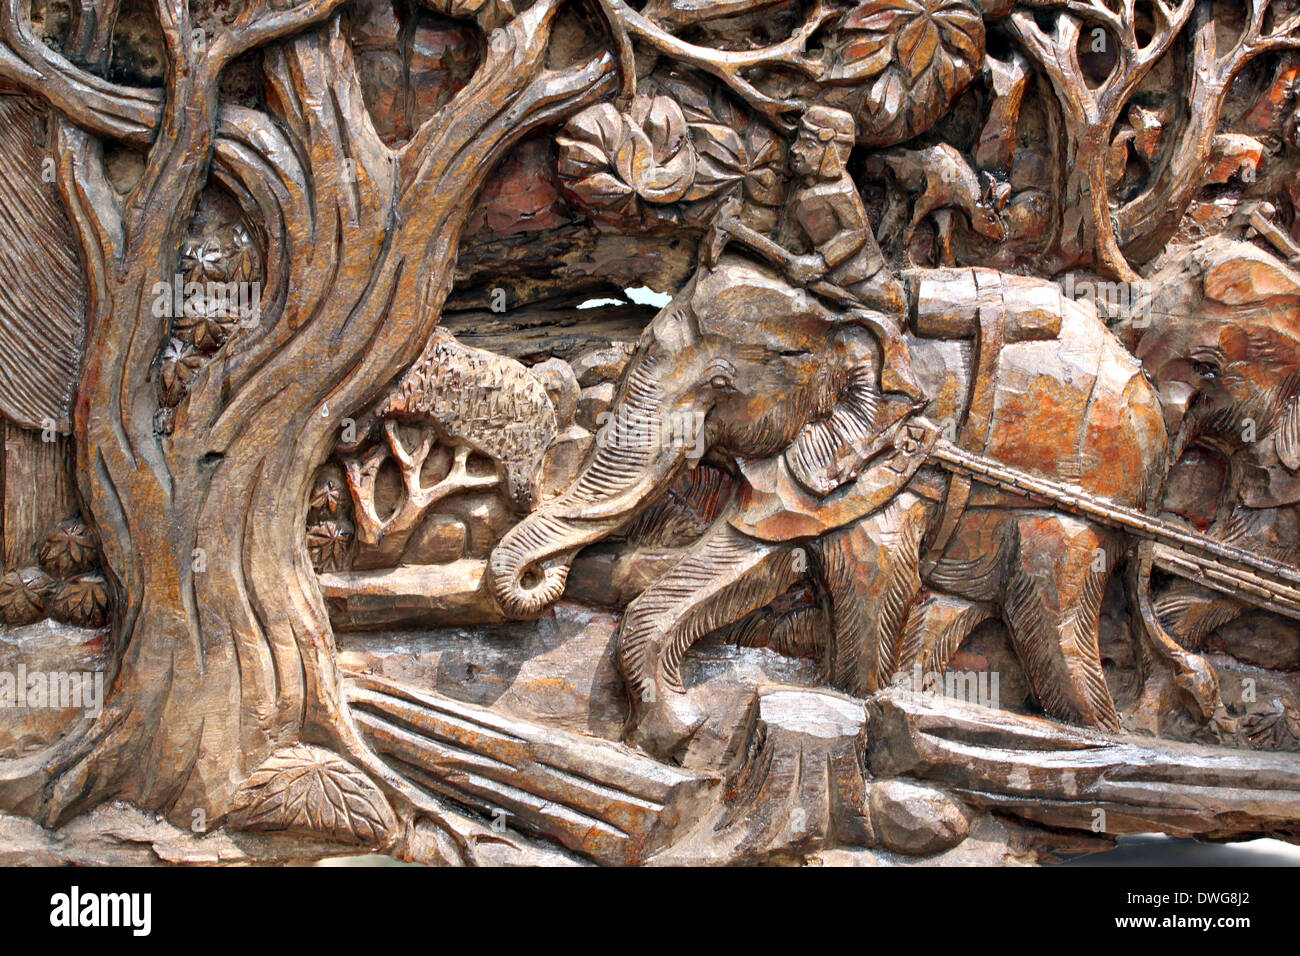 Motifs carved from wood of elephant. Stock Photo